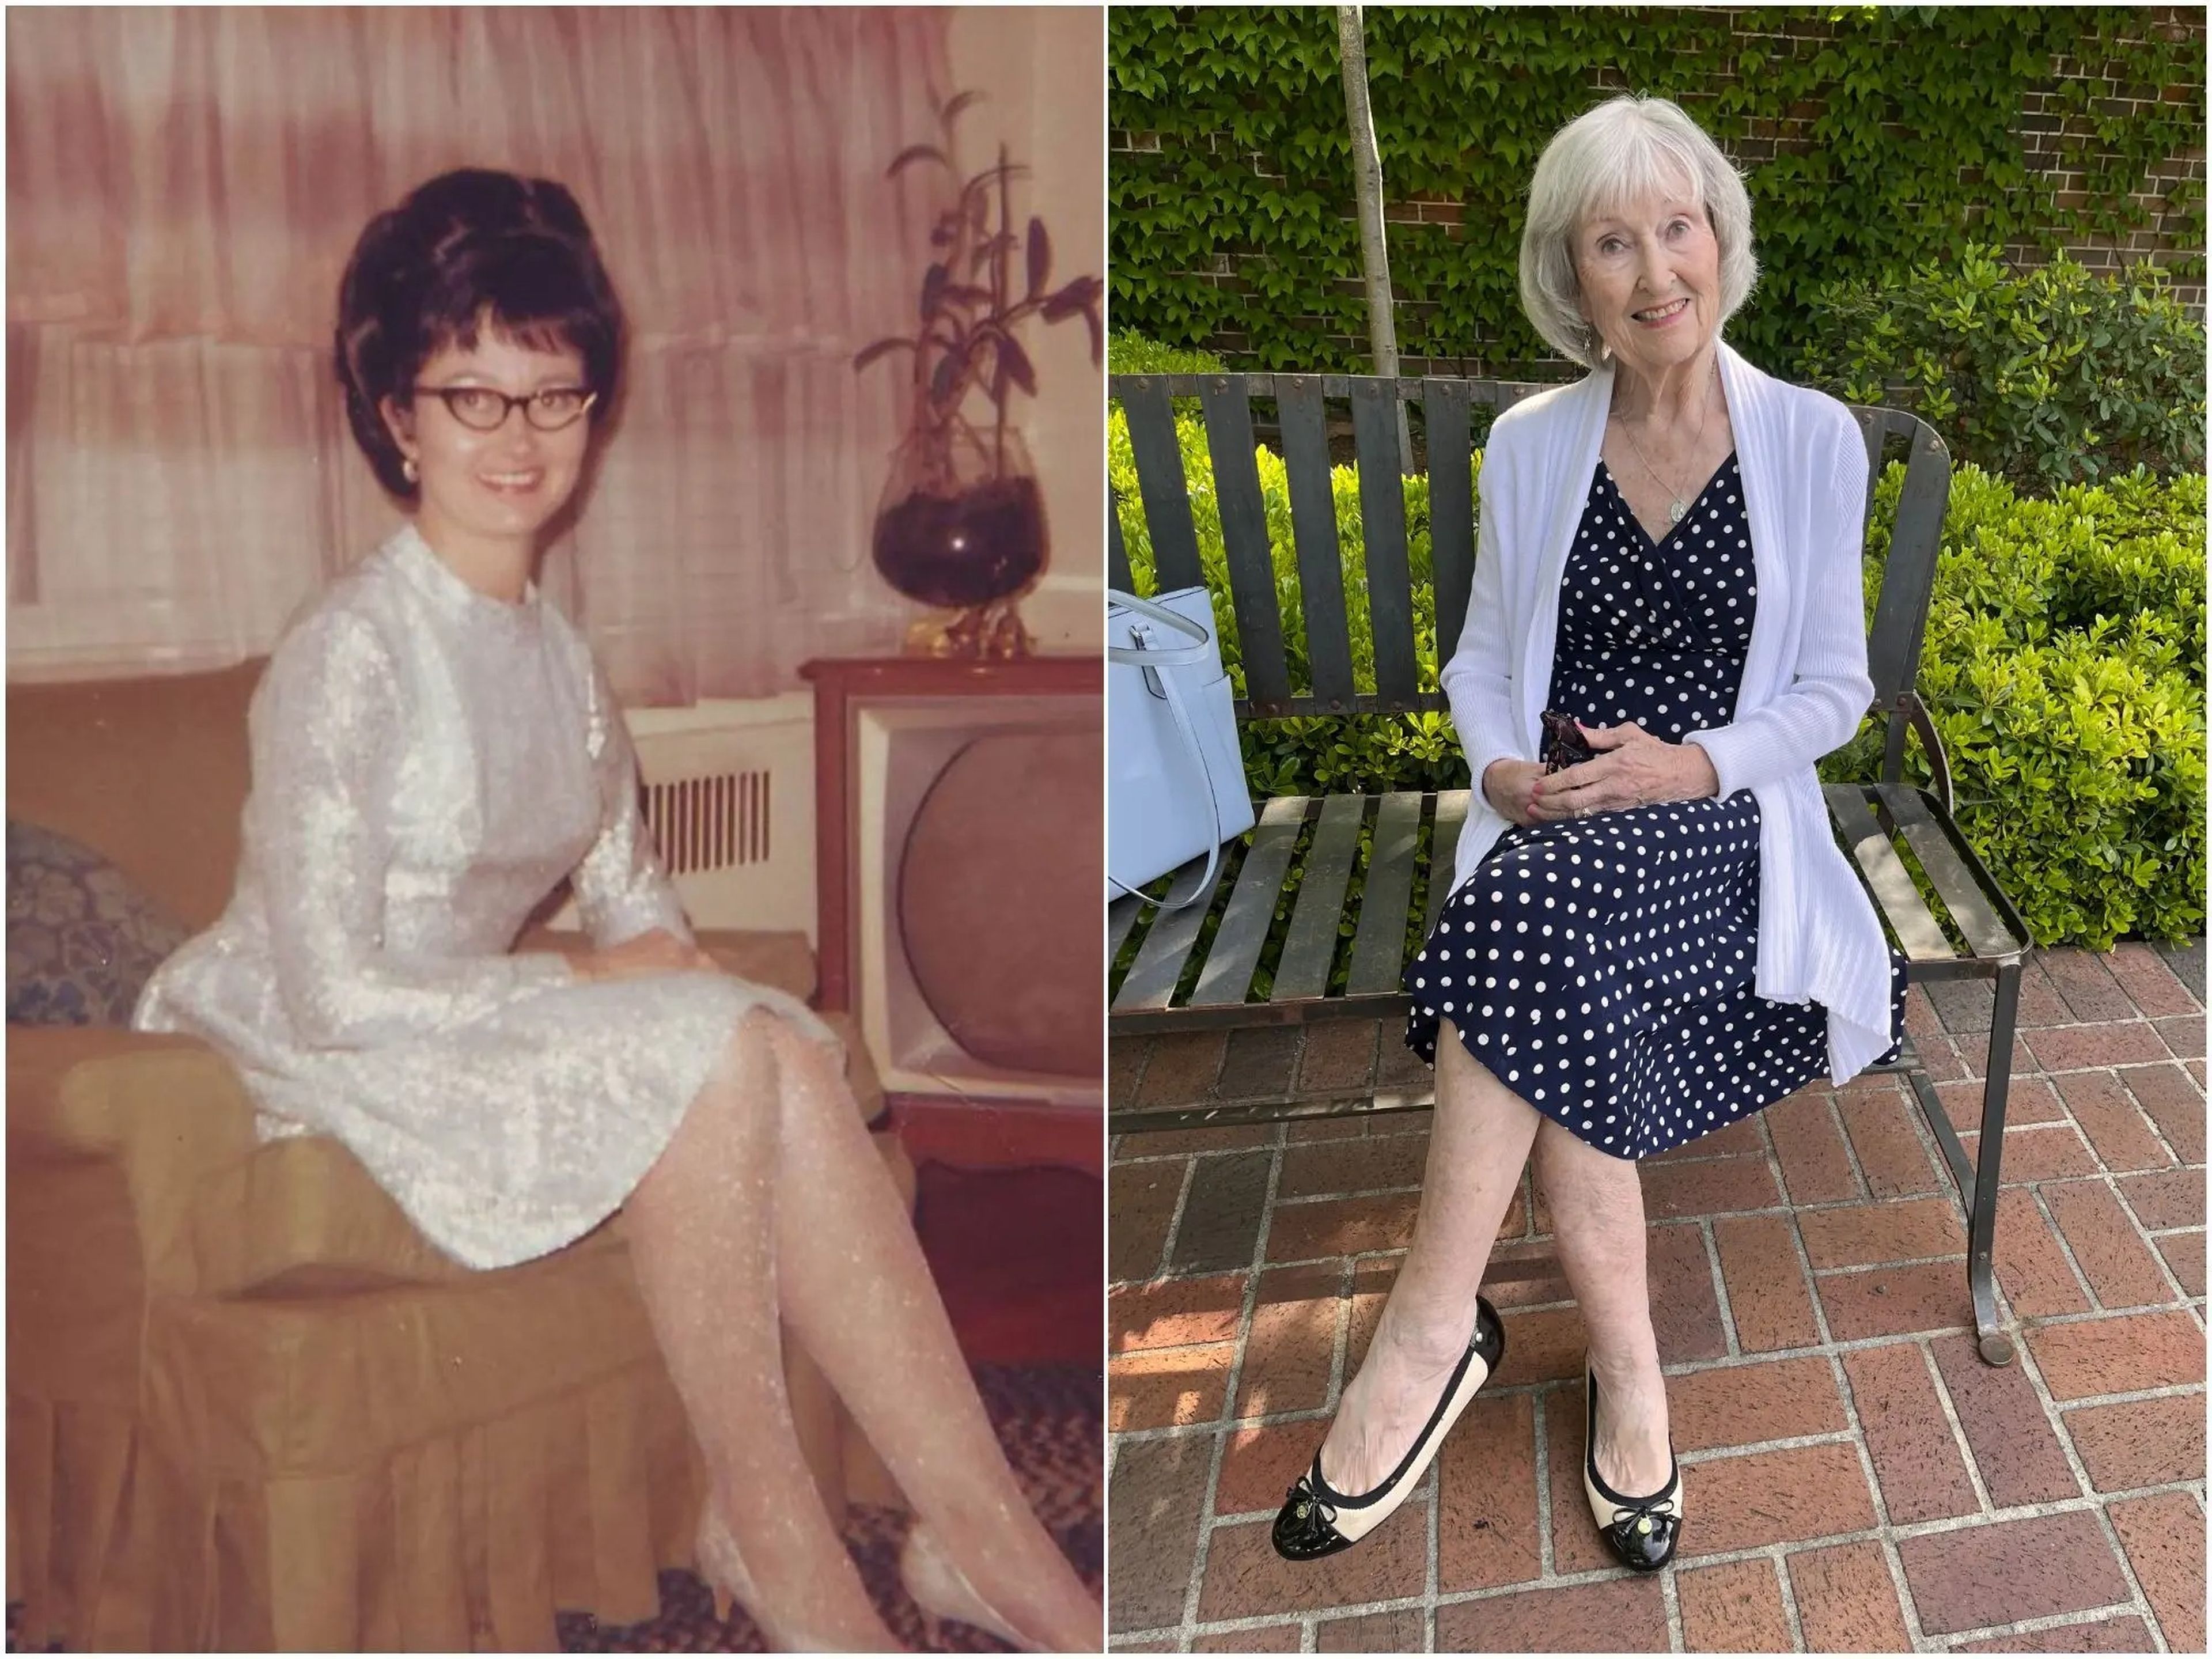 The author's grandmother, Kathleen, in the 1950s, and in present-day at the age of 91.